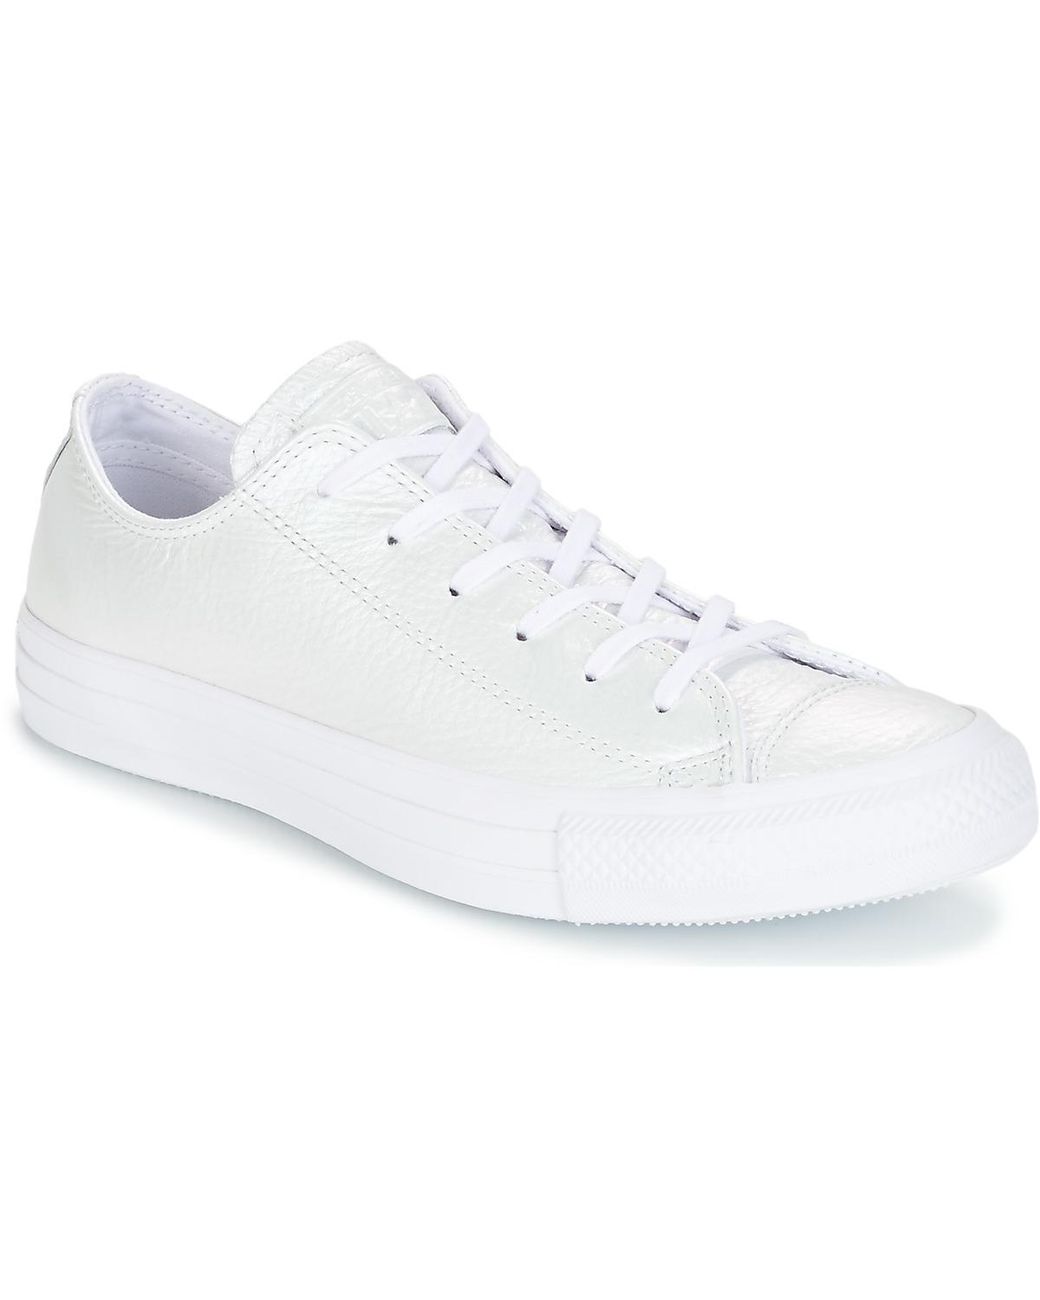 Converse Chuck Taylor Star Iridescent Leather Ox Iridescent O Shoes White | Lyst UK